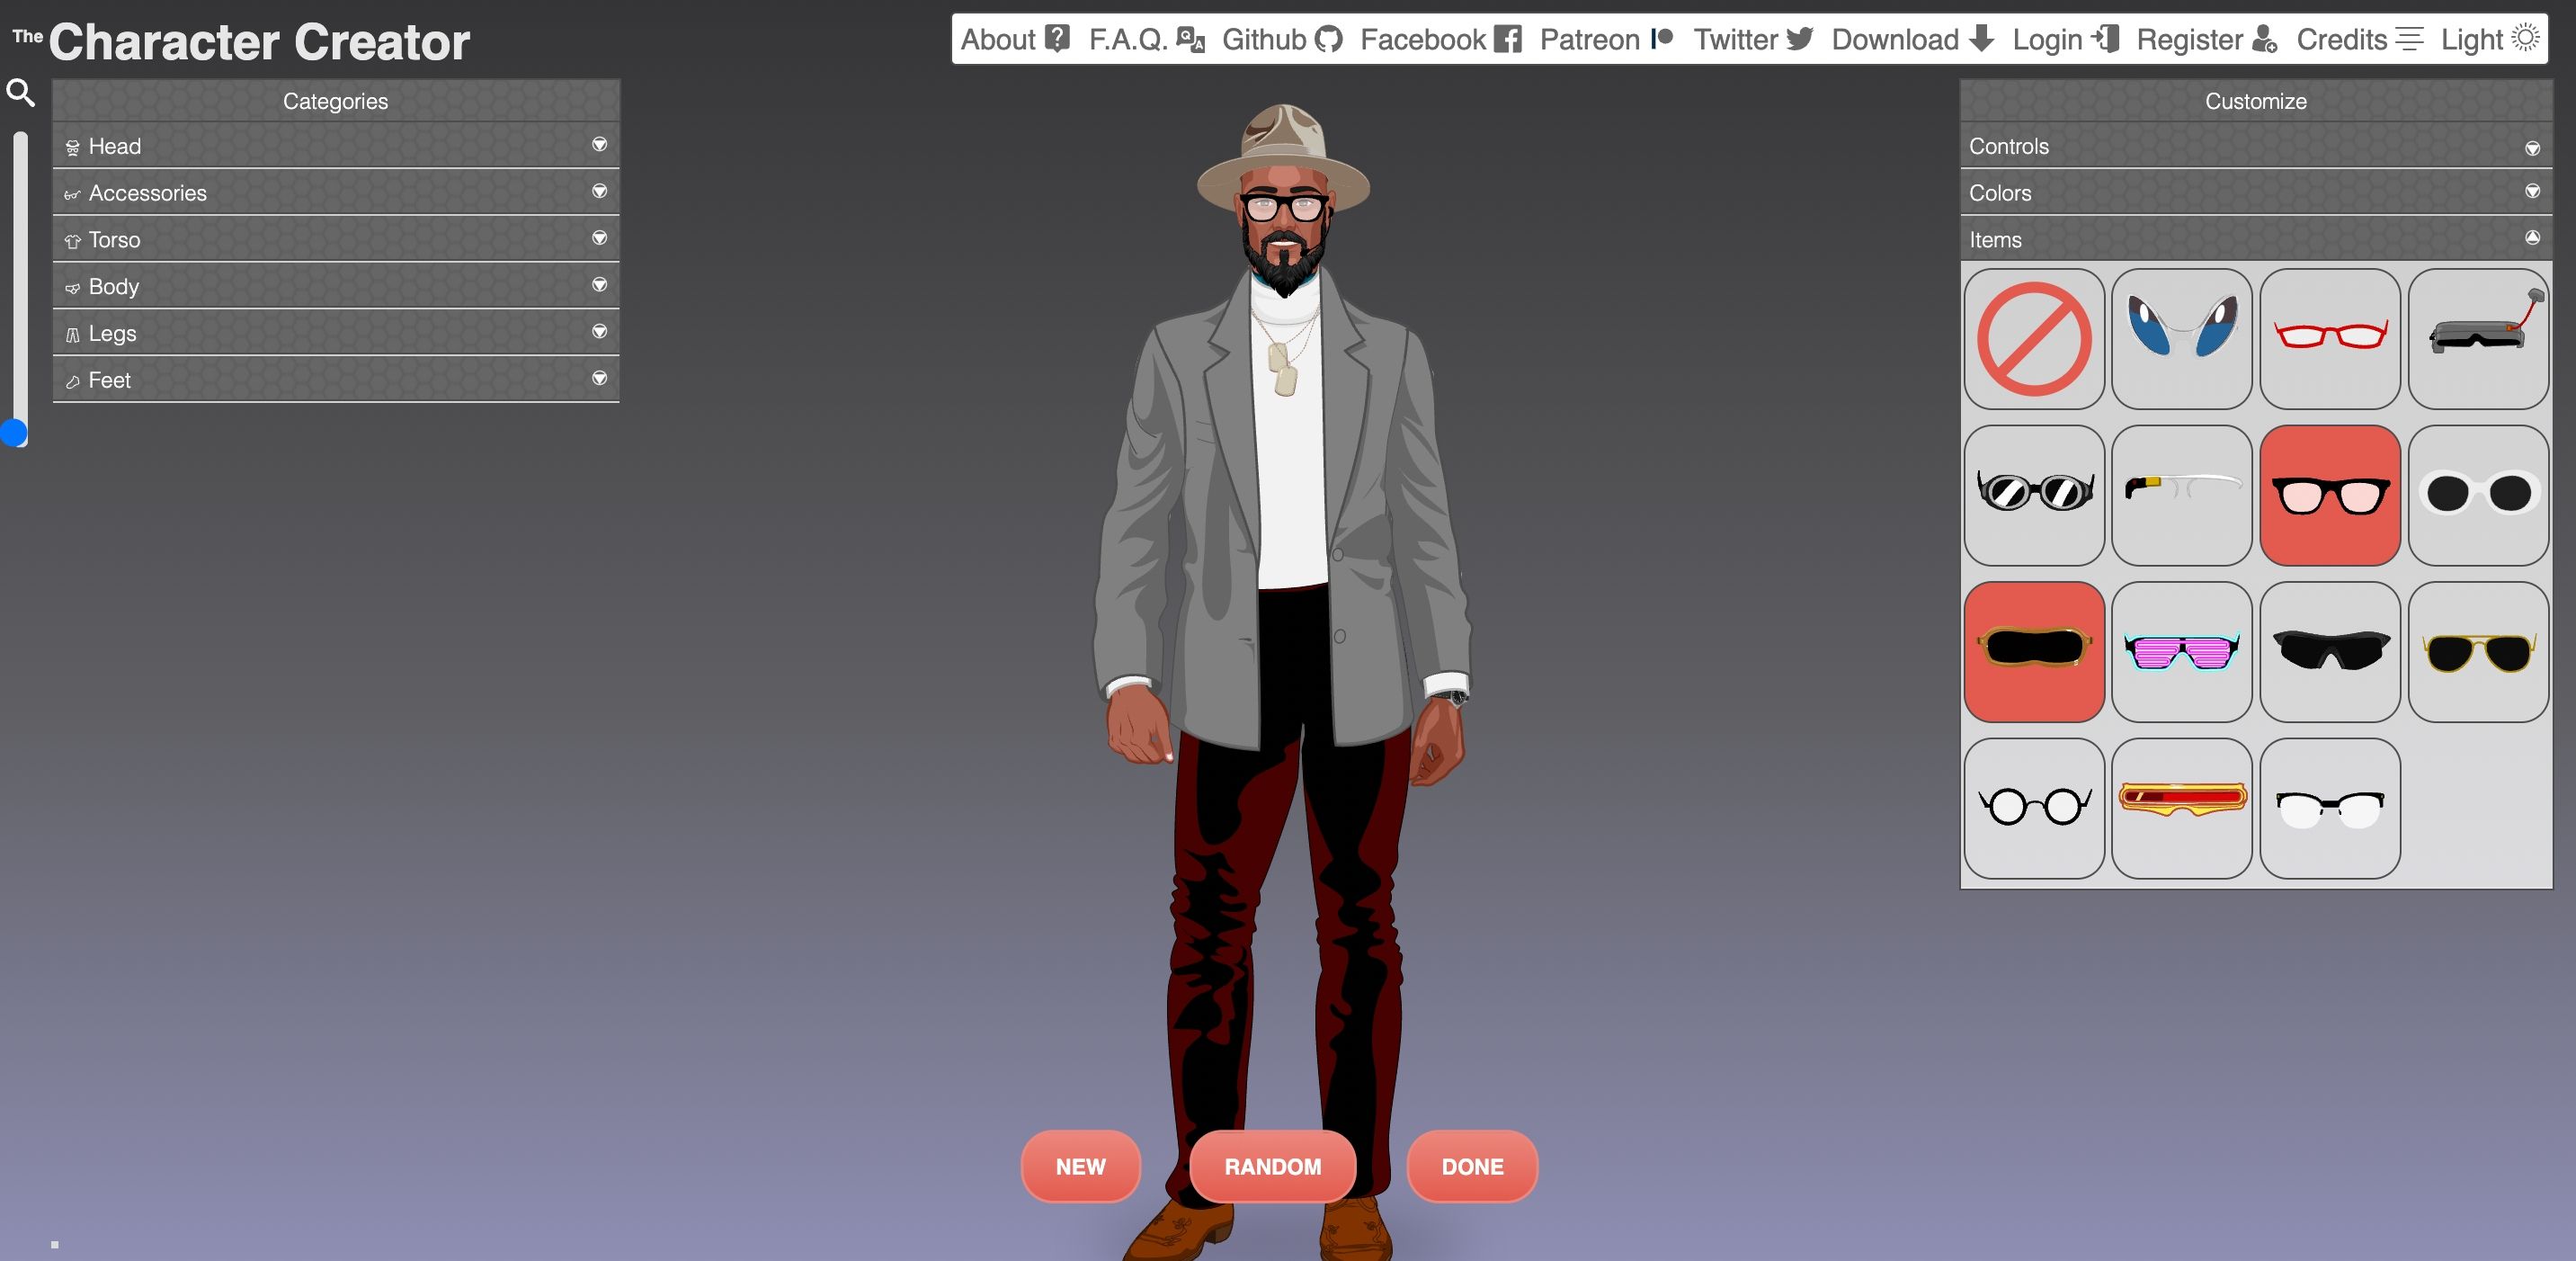 Making an avatar in Character Creator